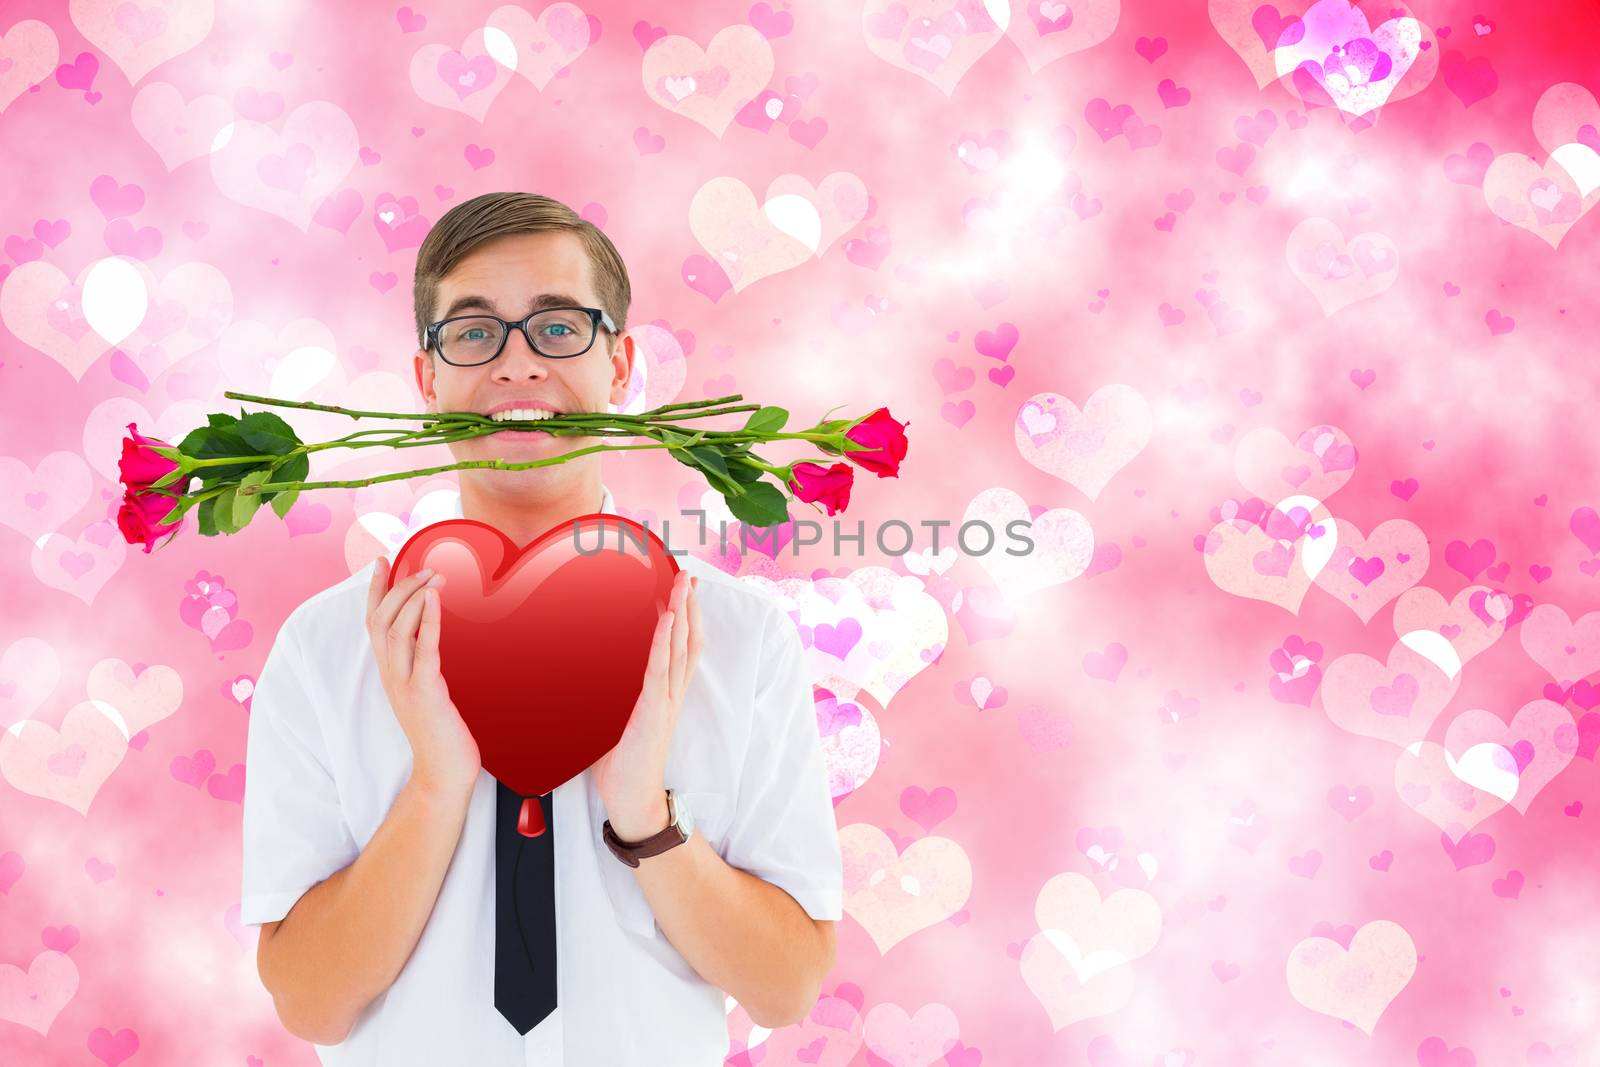 Romantic geeky hipster against digitally generated girly heart design